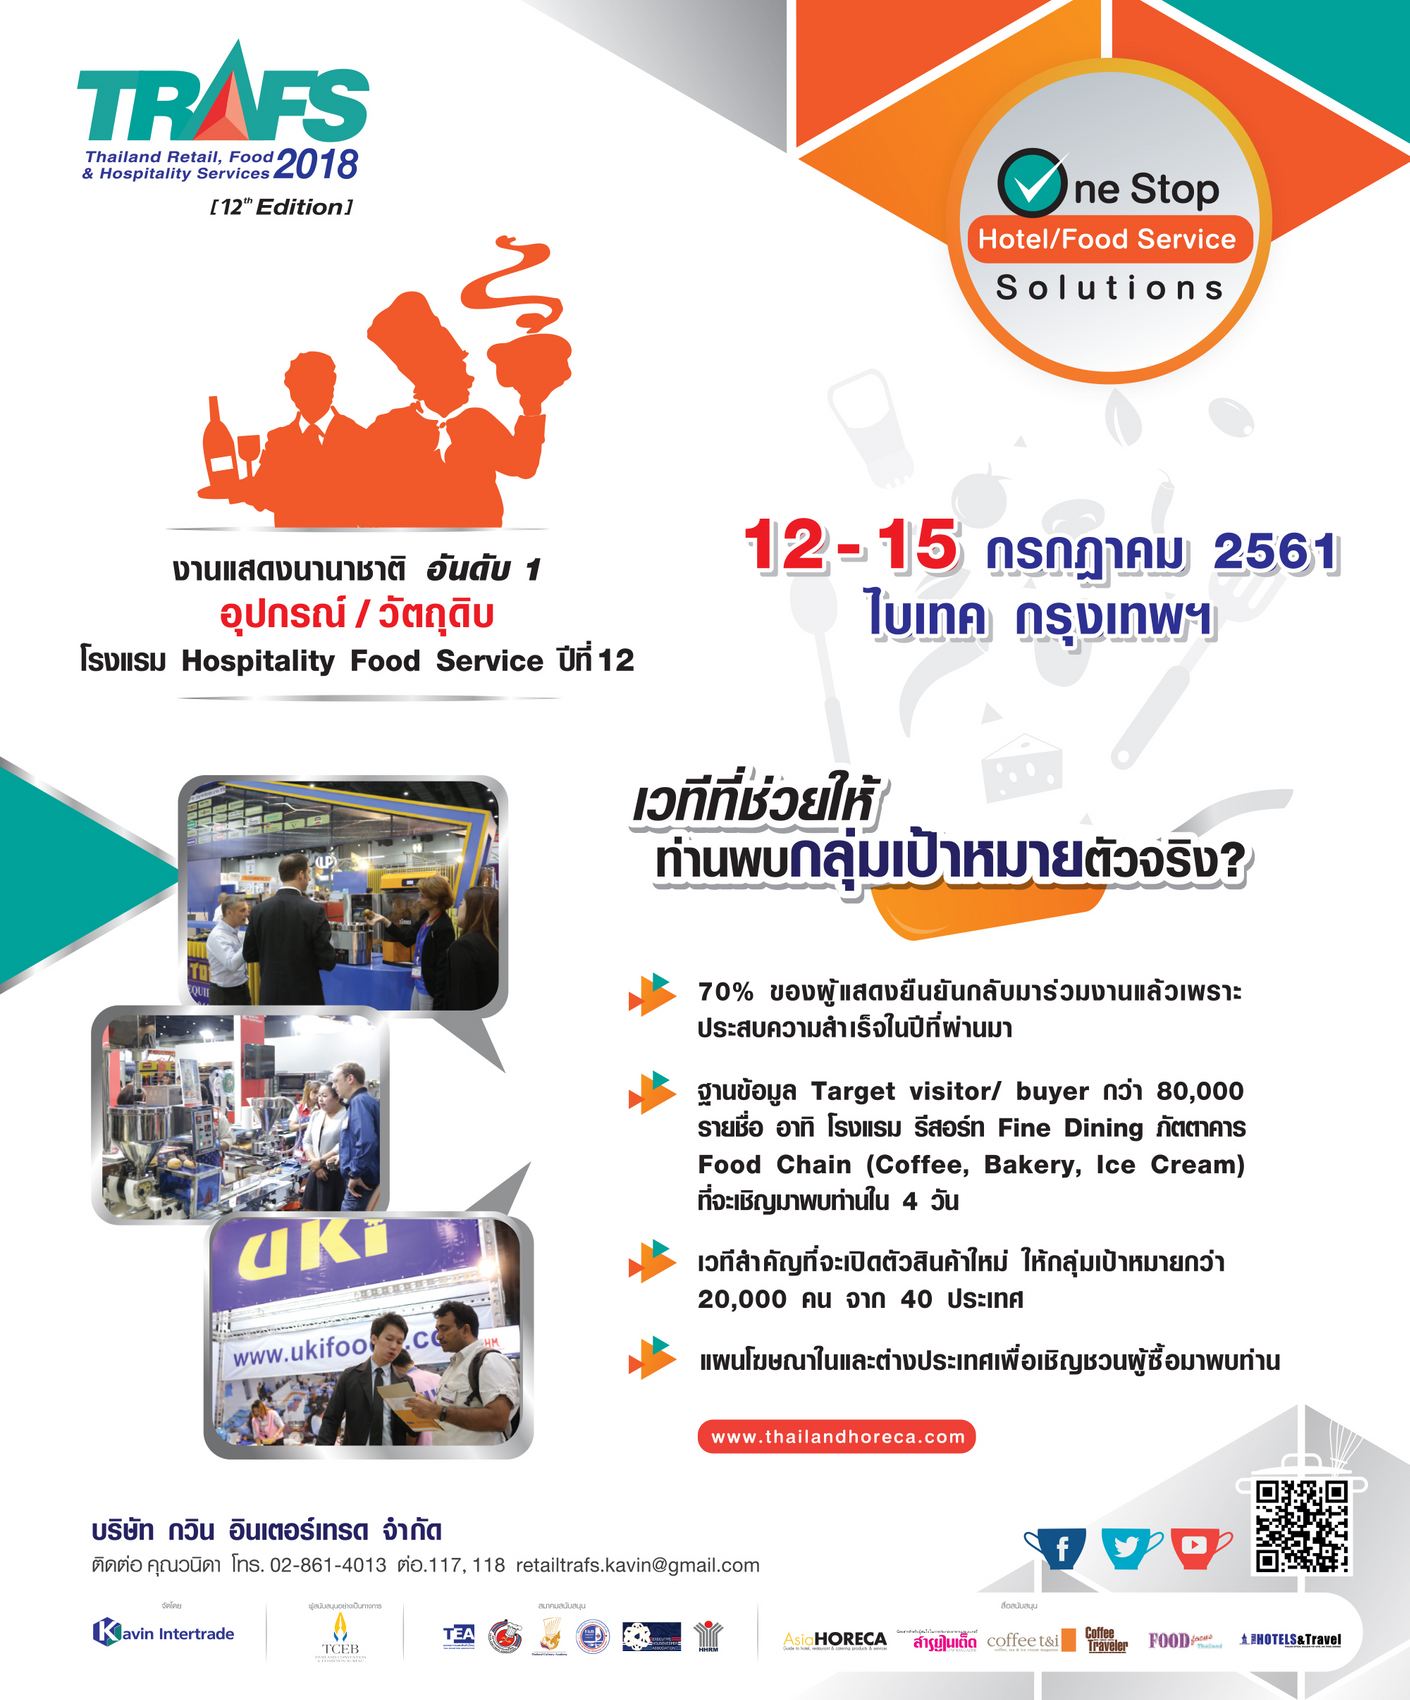 Thailand Retail, Foods & Hospitality Services, 12th edition (TRAFS 2018)